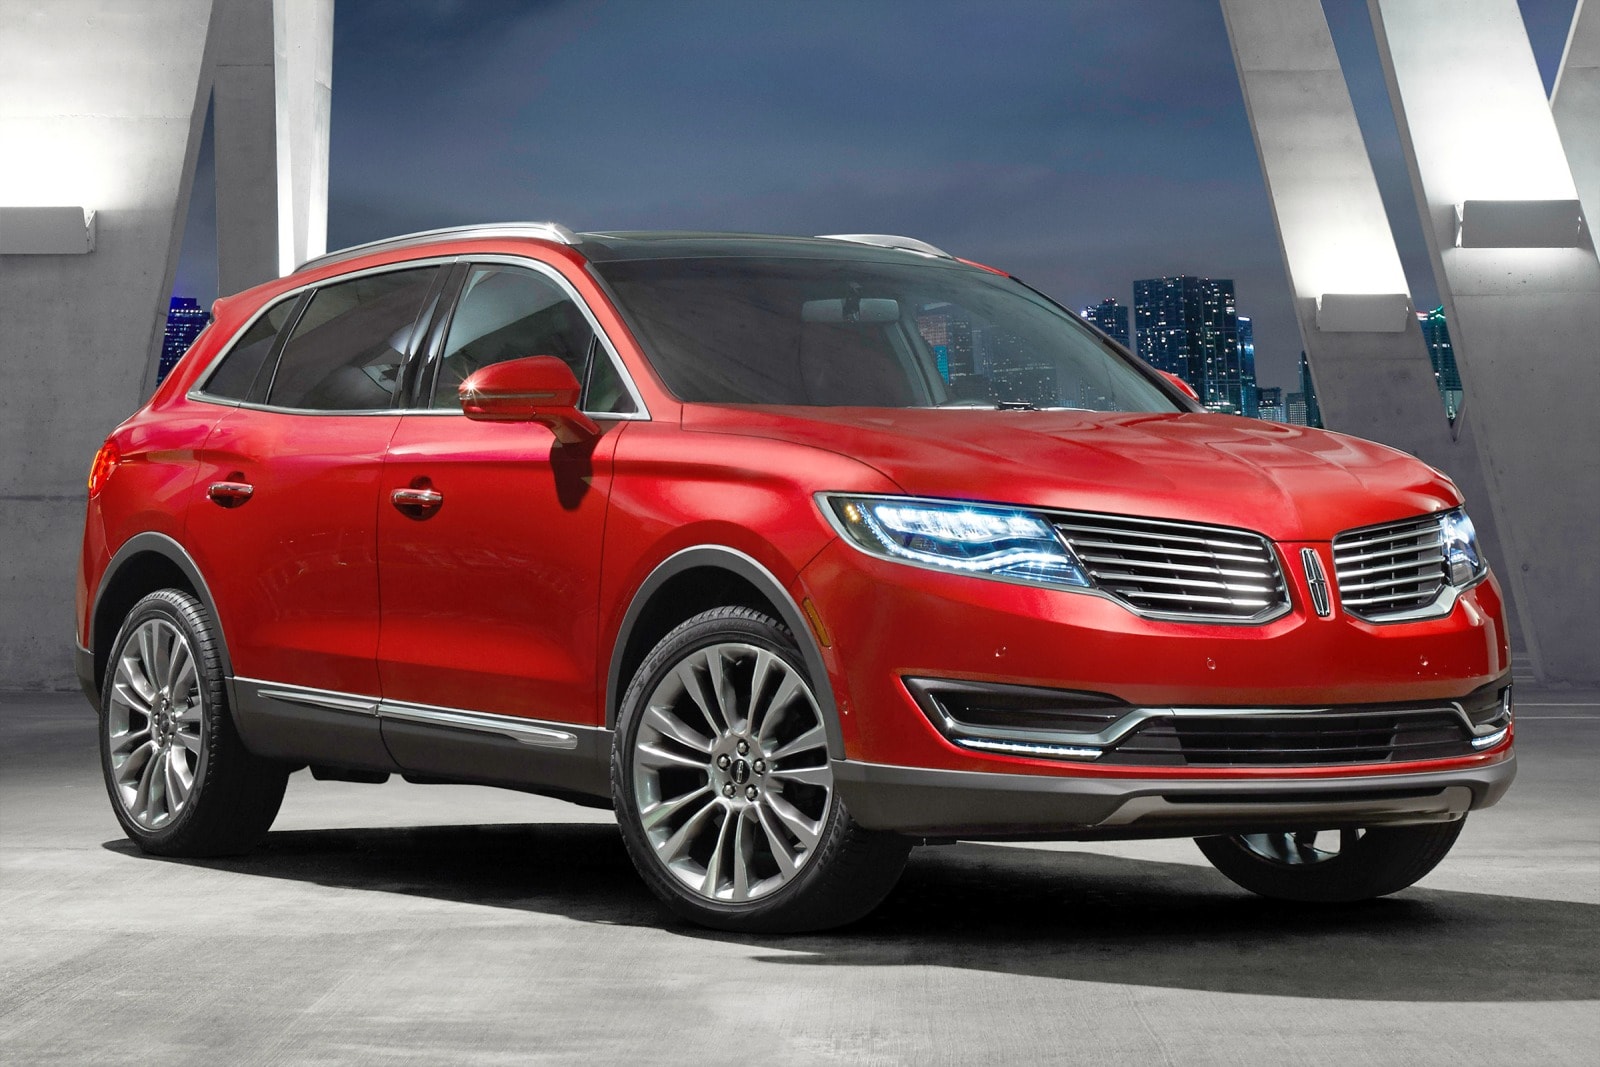 2016 Lincoln MKX Review & Ratings | Edmunds